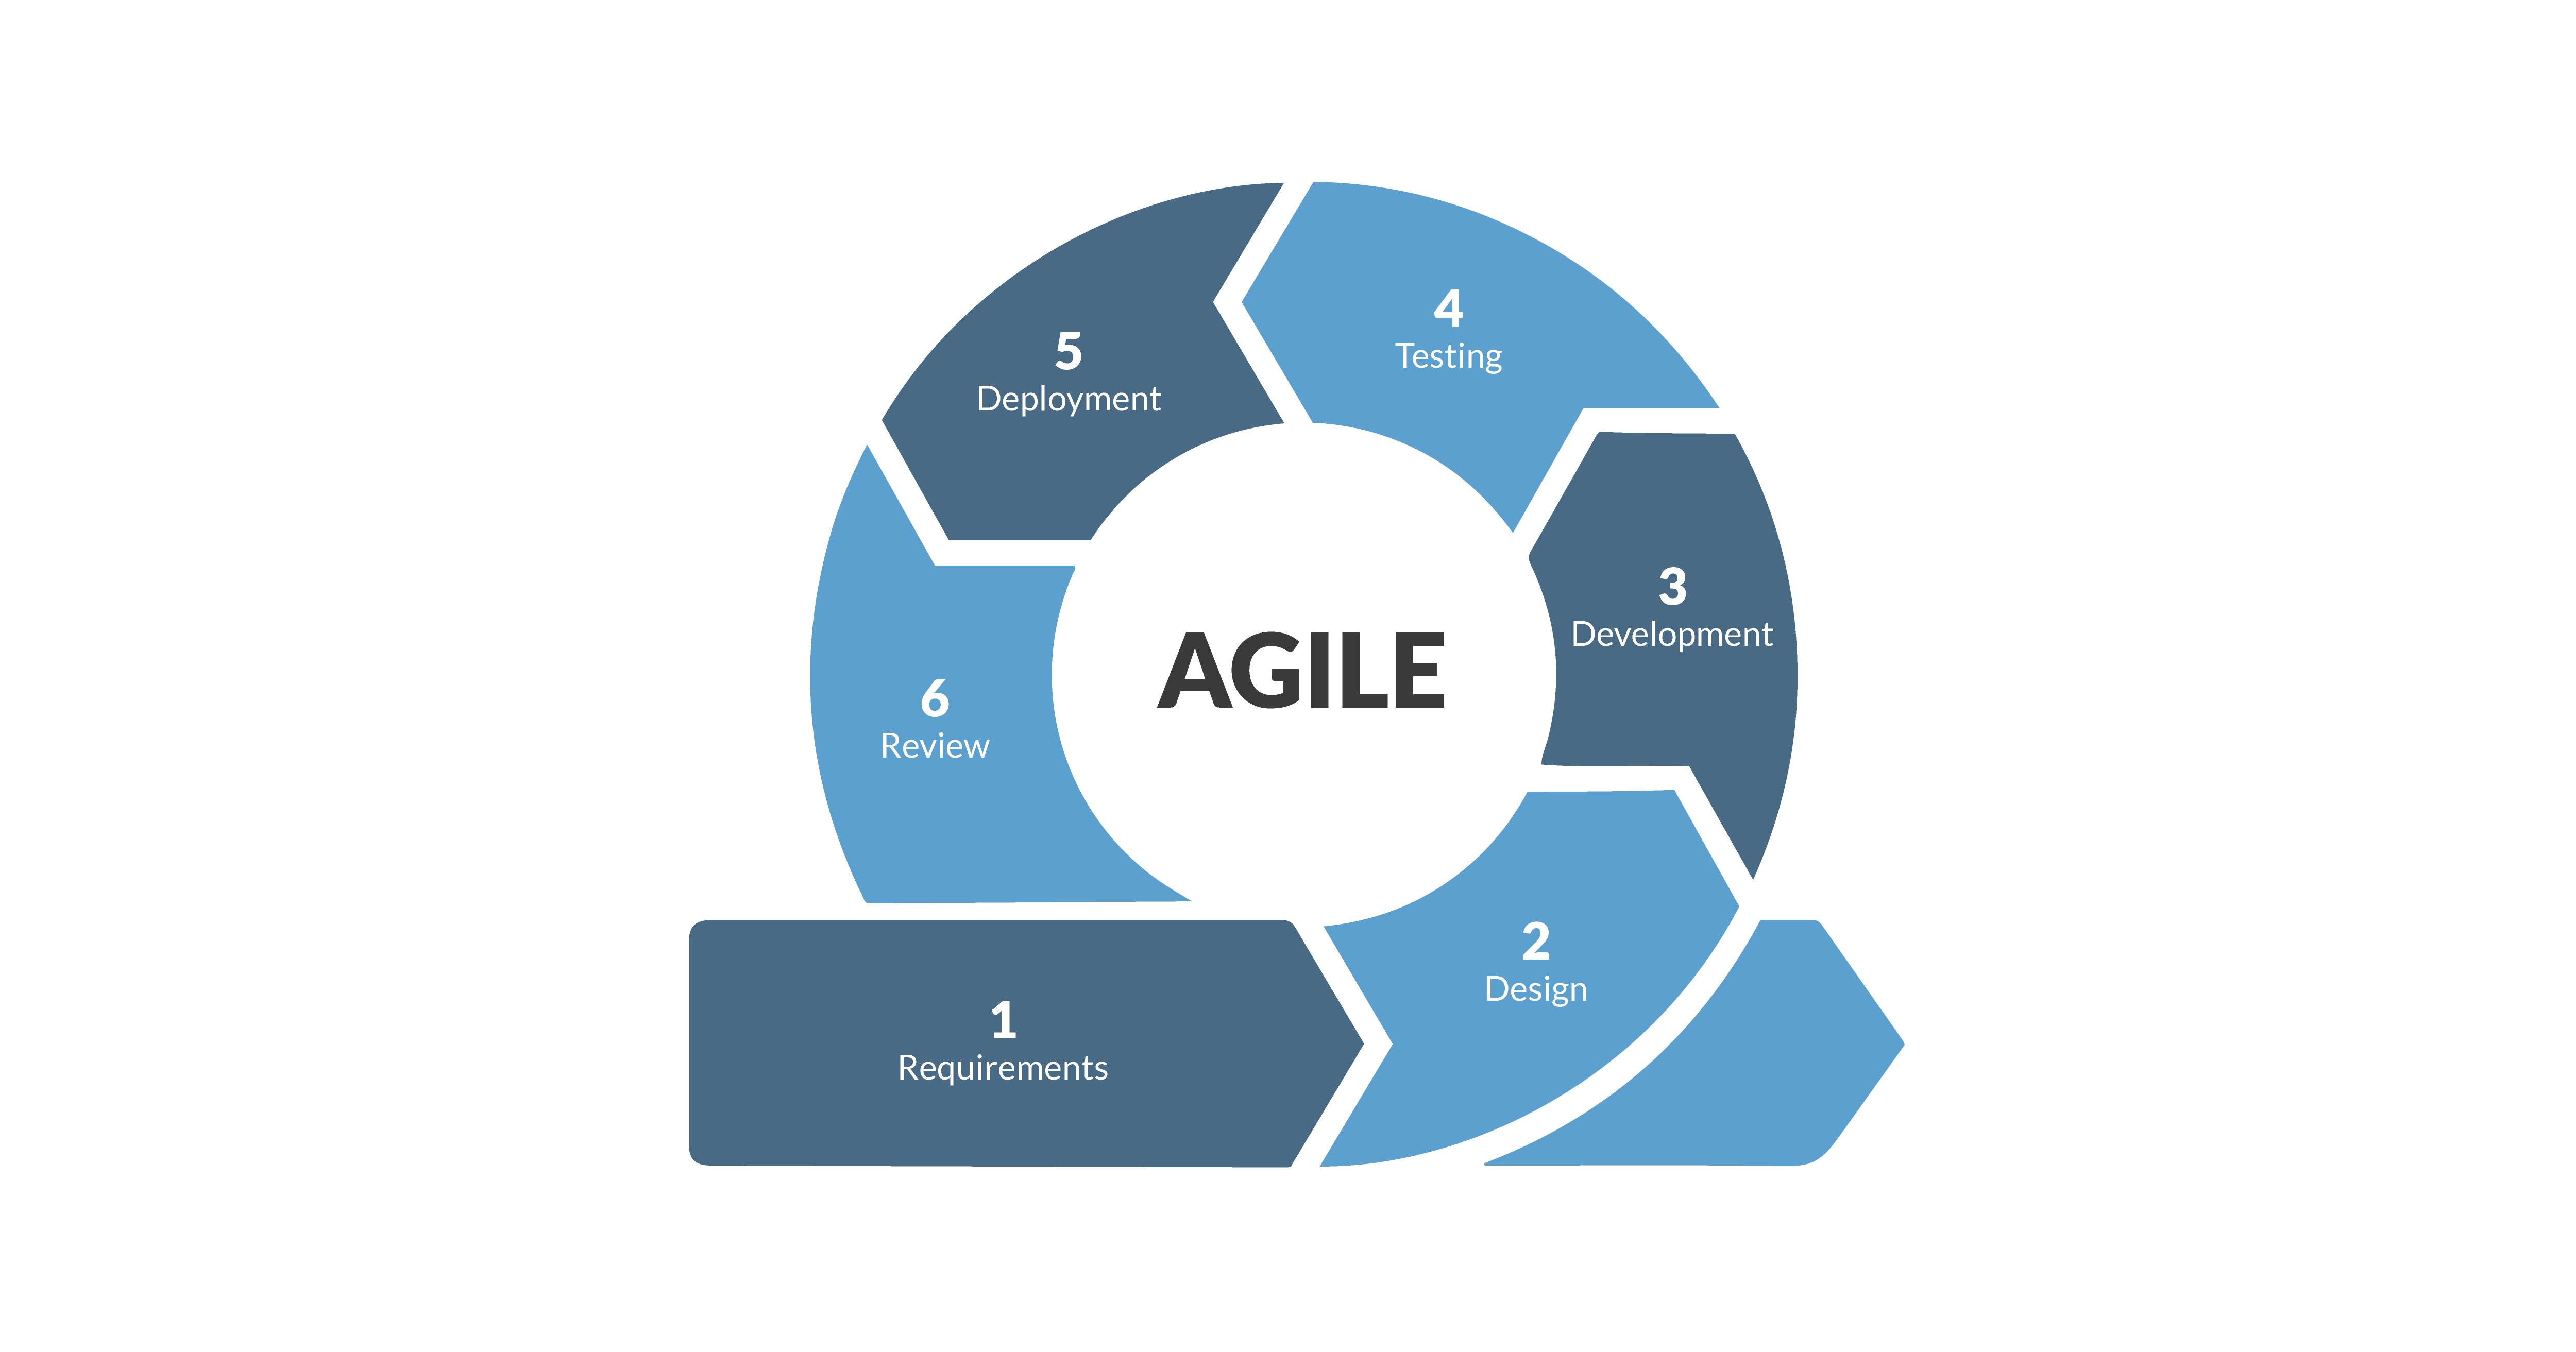 What is Agile